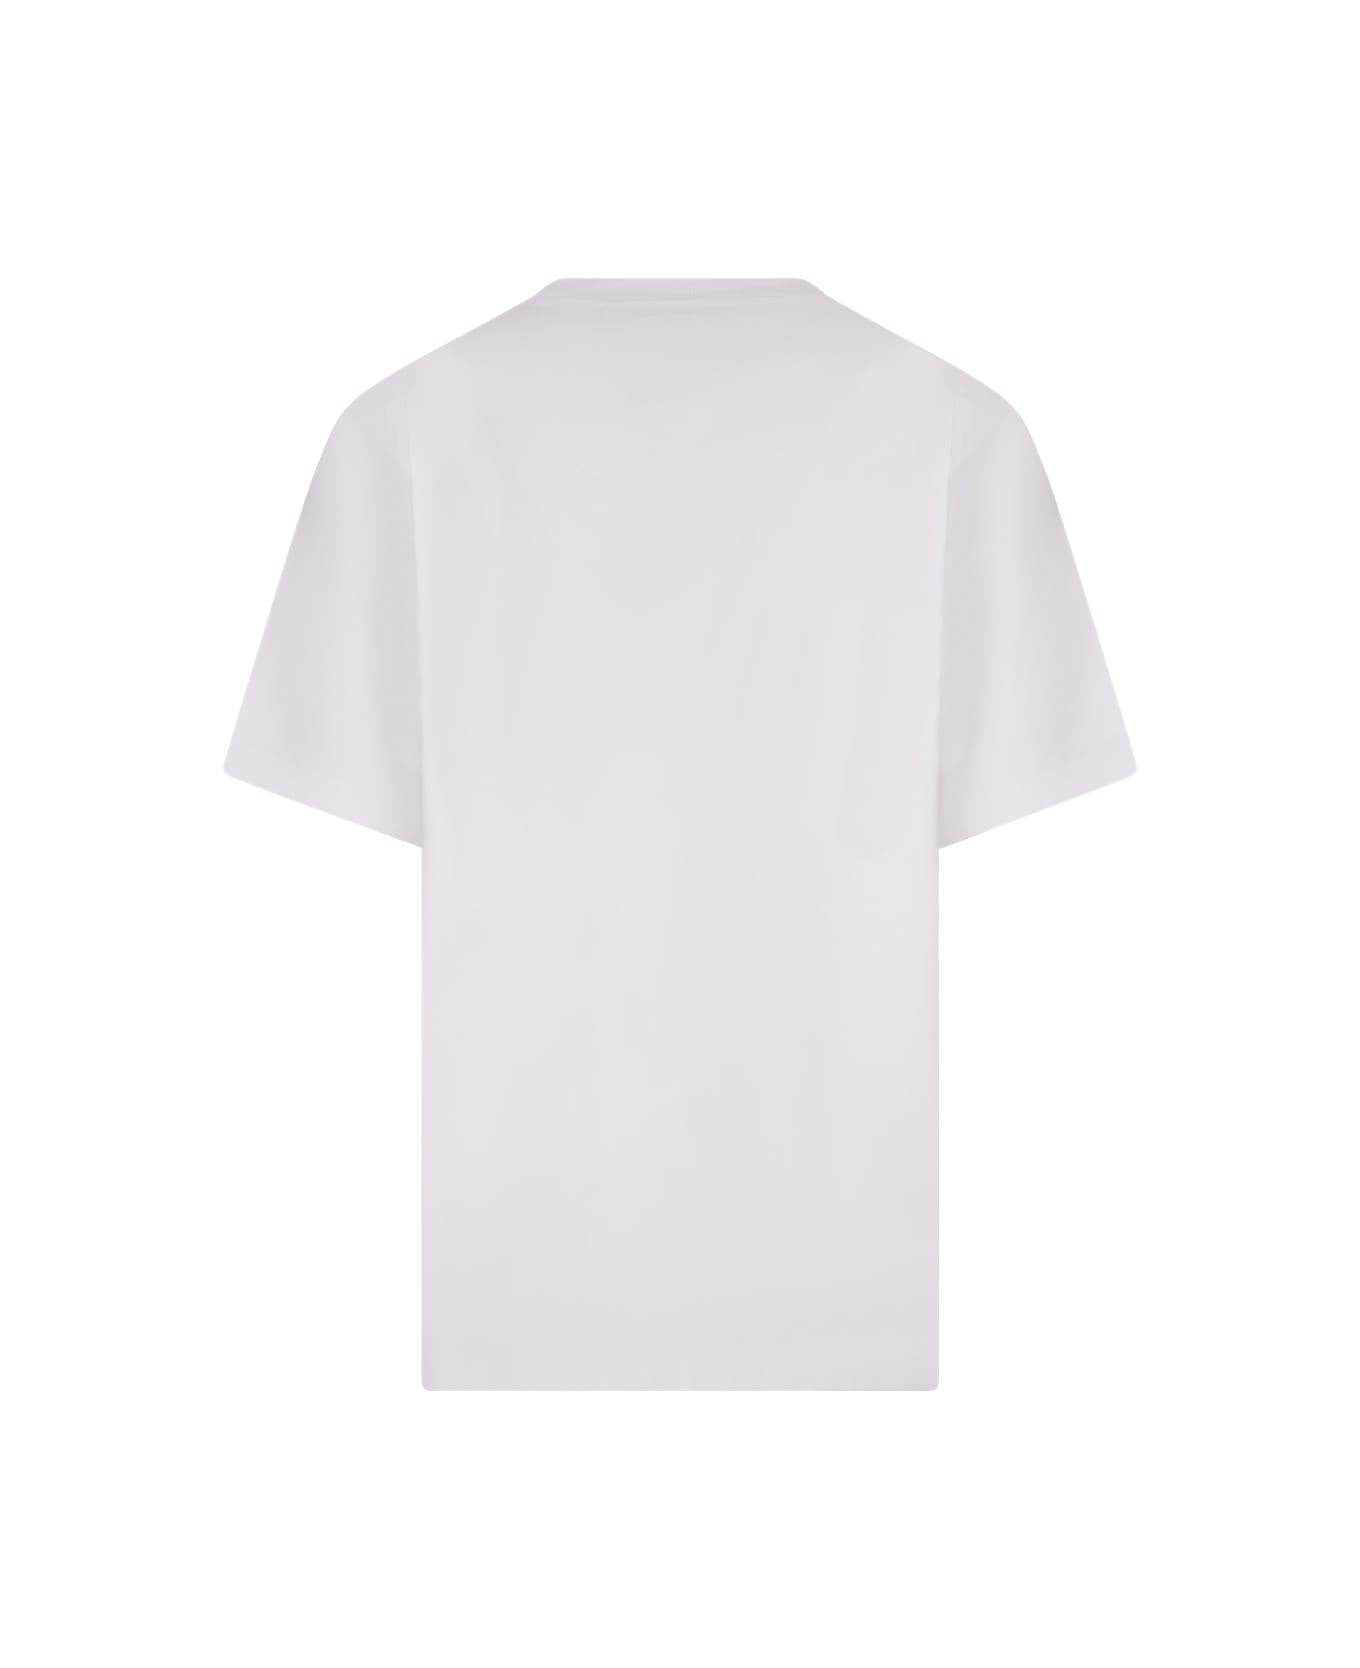 Dsquared2 Cool Fit T-shirt In White - White